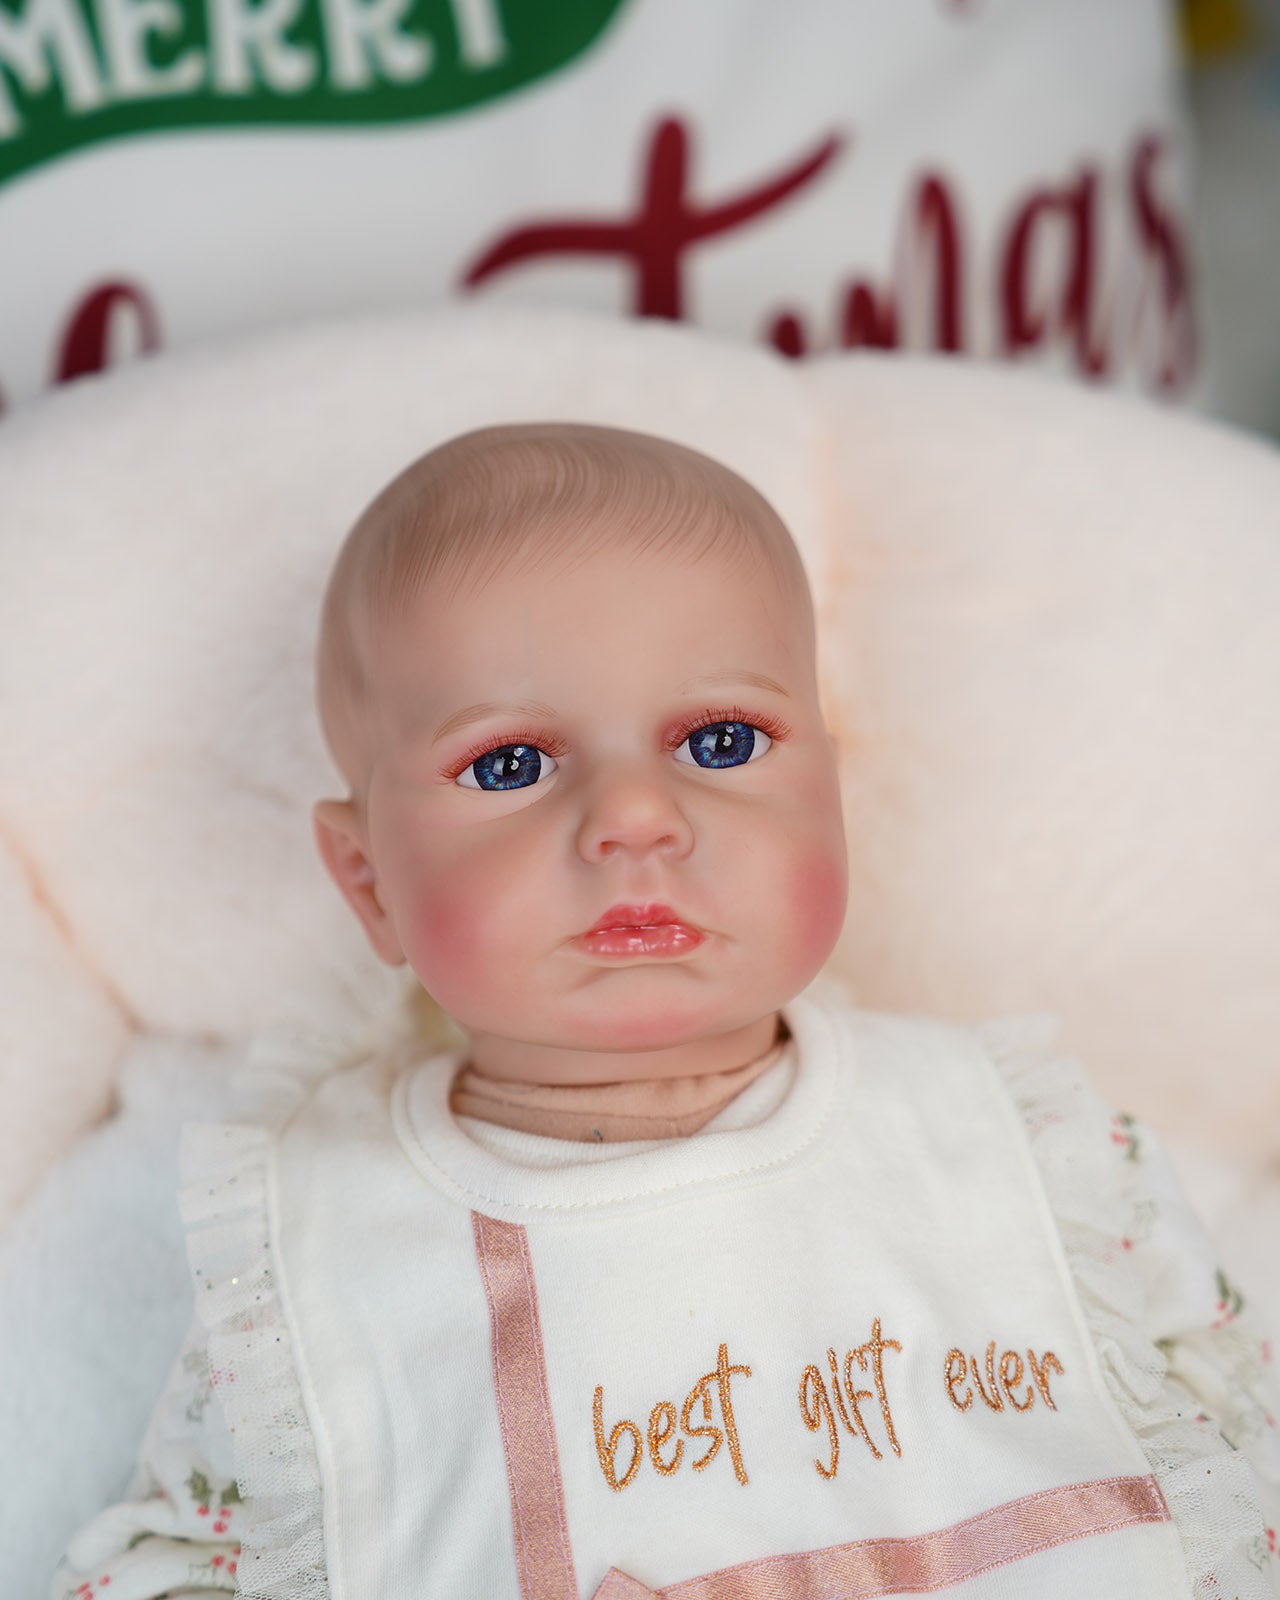 Marian - 20" Reborn Baby Dolls Soft and Cuddly Newborn Girl with Soft Weighted Cloth Body